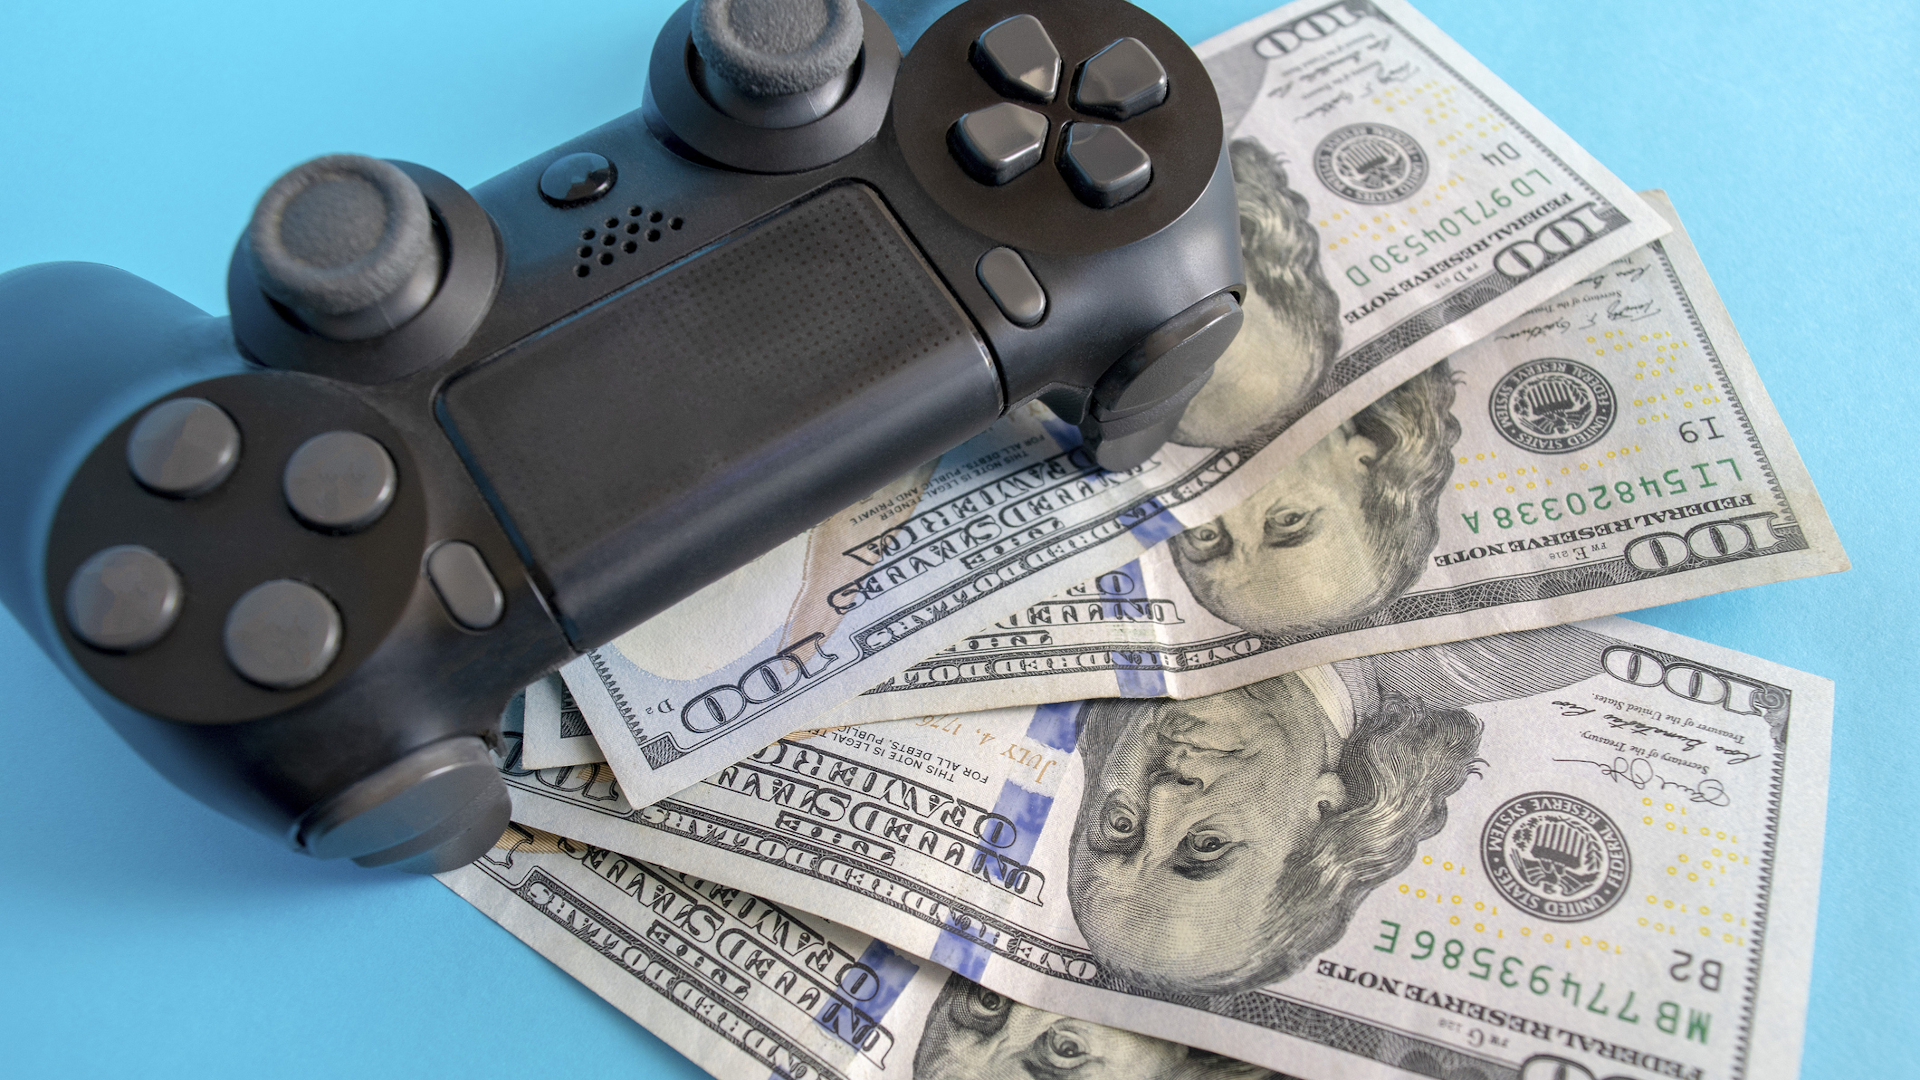 7 Easy Ways to Save Money on Video Games